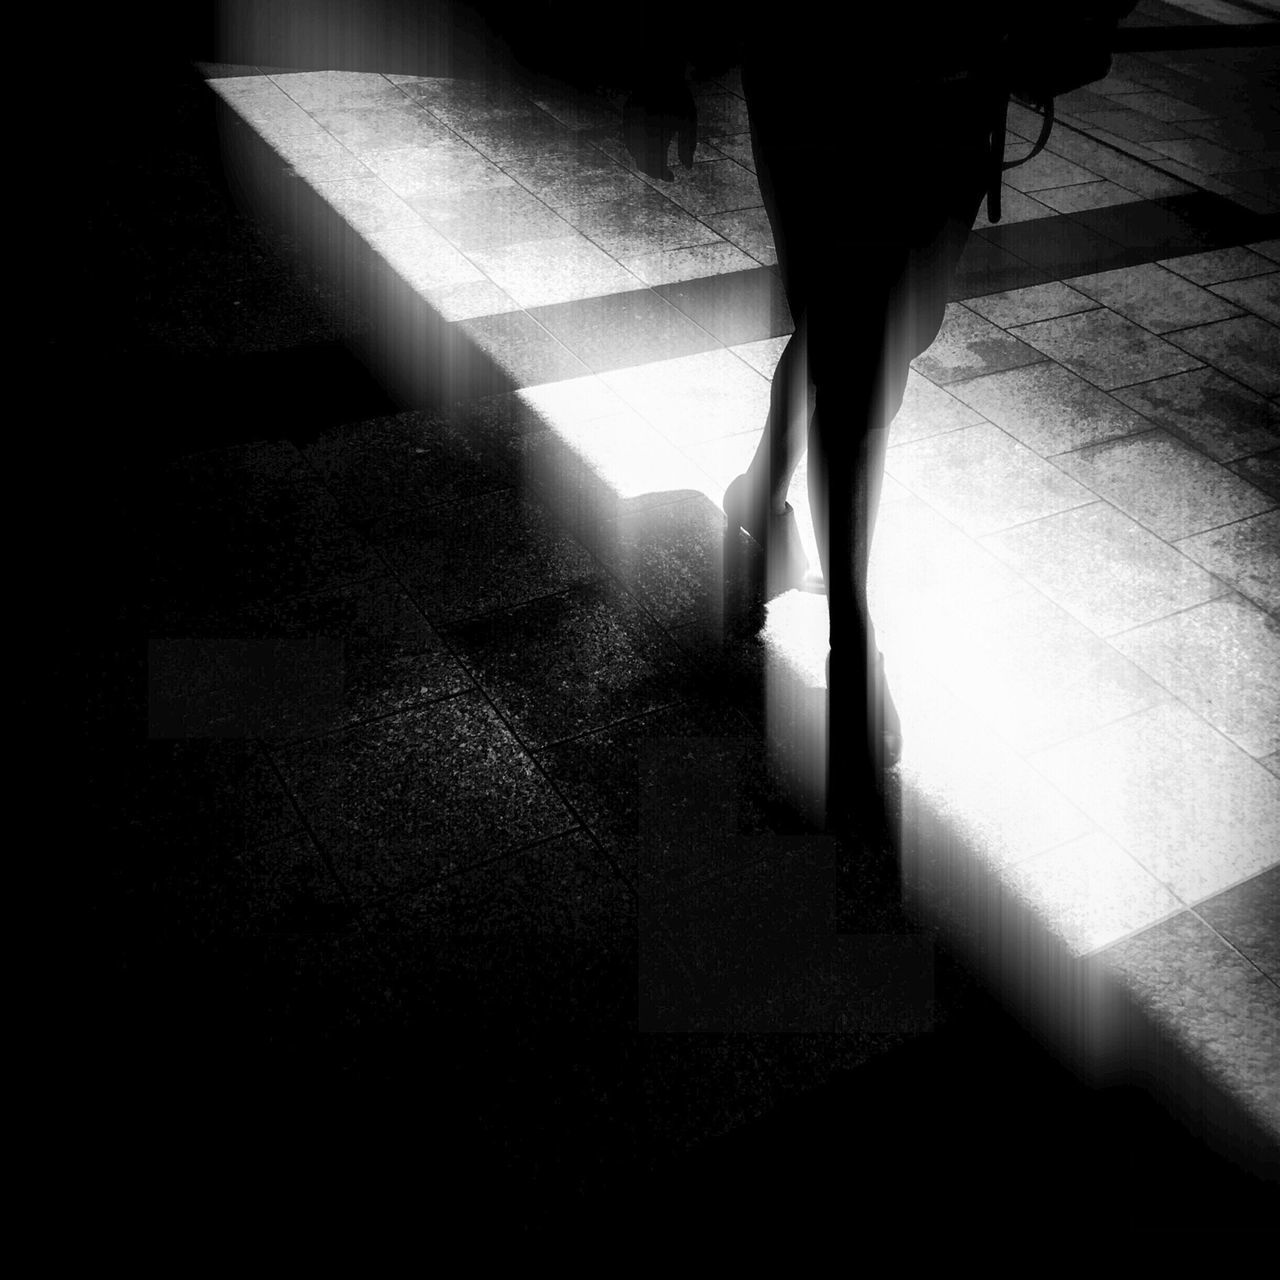 lifestyles, shadow, walking, men, low section, sunlight, leisure activity, person, indoors, standing, the way forward, rear view, unrecognizable person, architecture, full length, silhouette, tiled floor